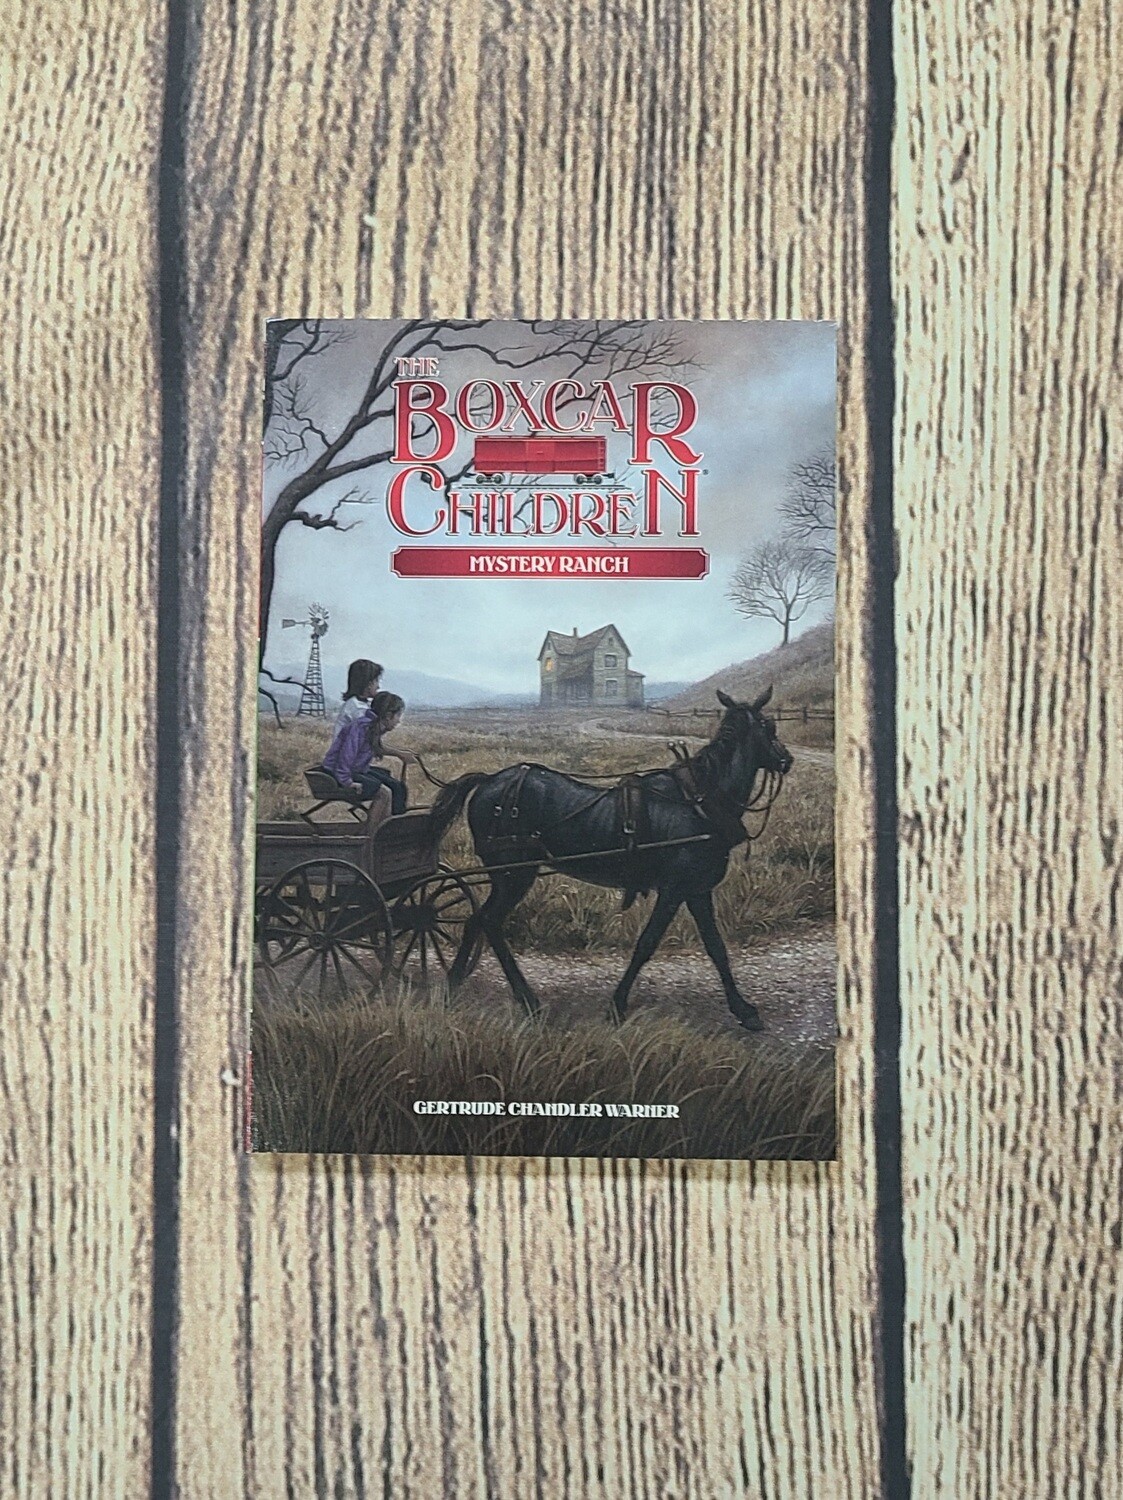 The Boxcar Children: Mystery Ranch by Gertrude Chandler Warner